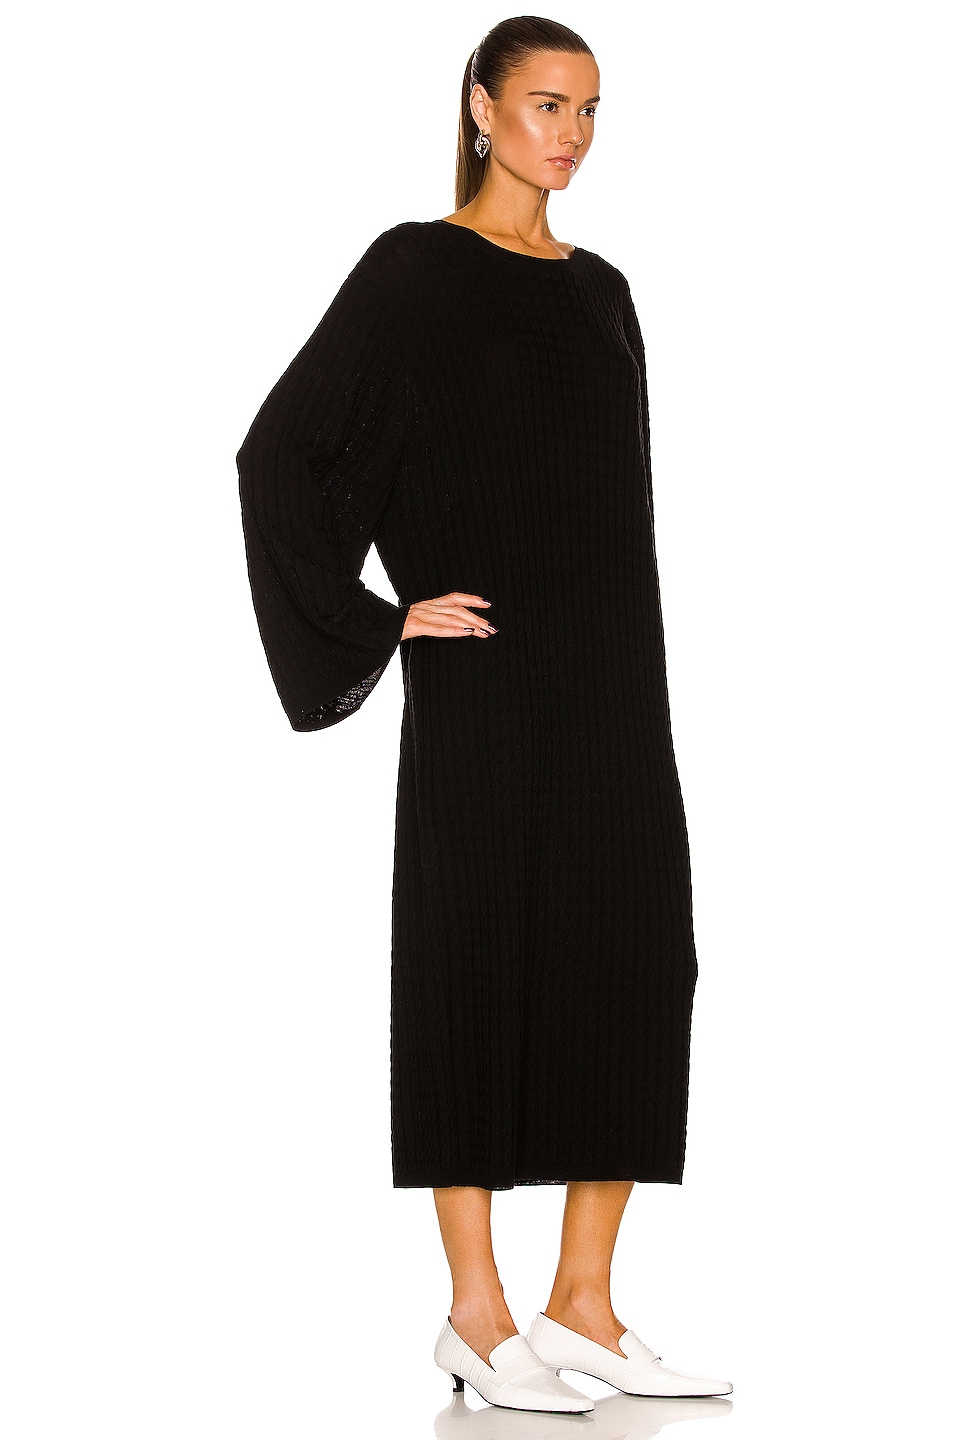 Toteme Cable Knit Dress in Black FWRD